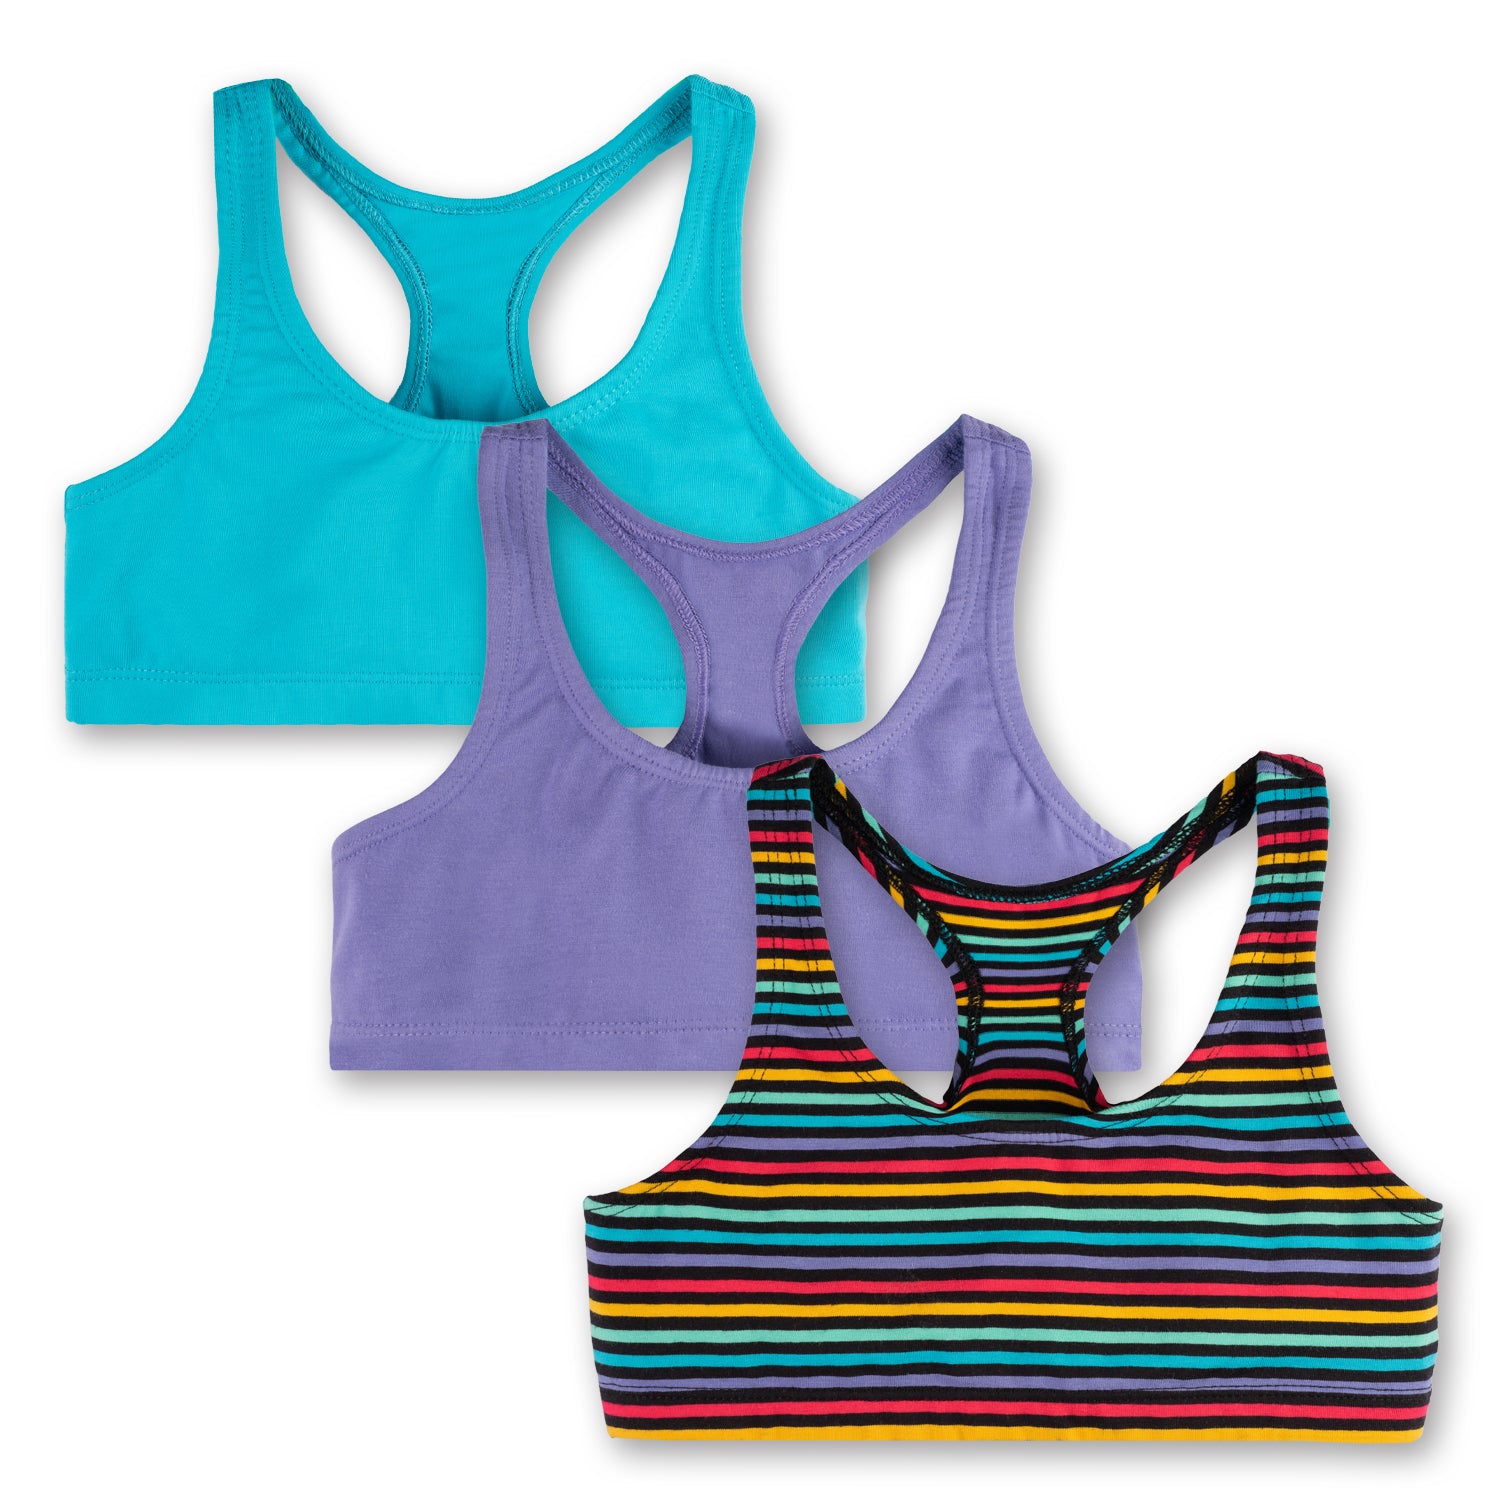 Fruit of The Loom Women's Built-up Sports Bra 3 Pack Multicolor